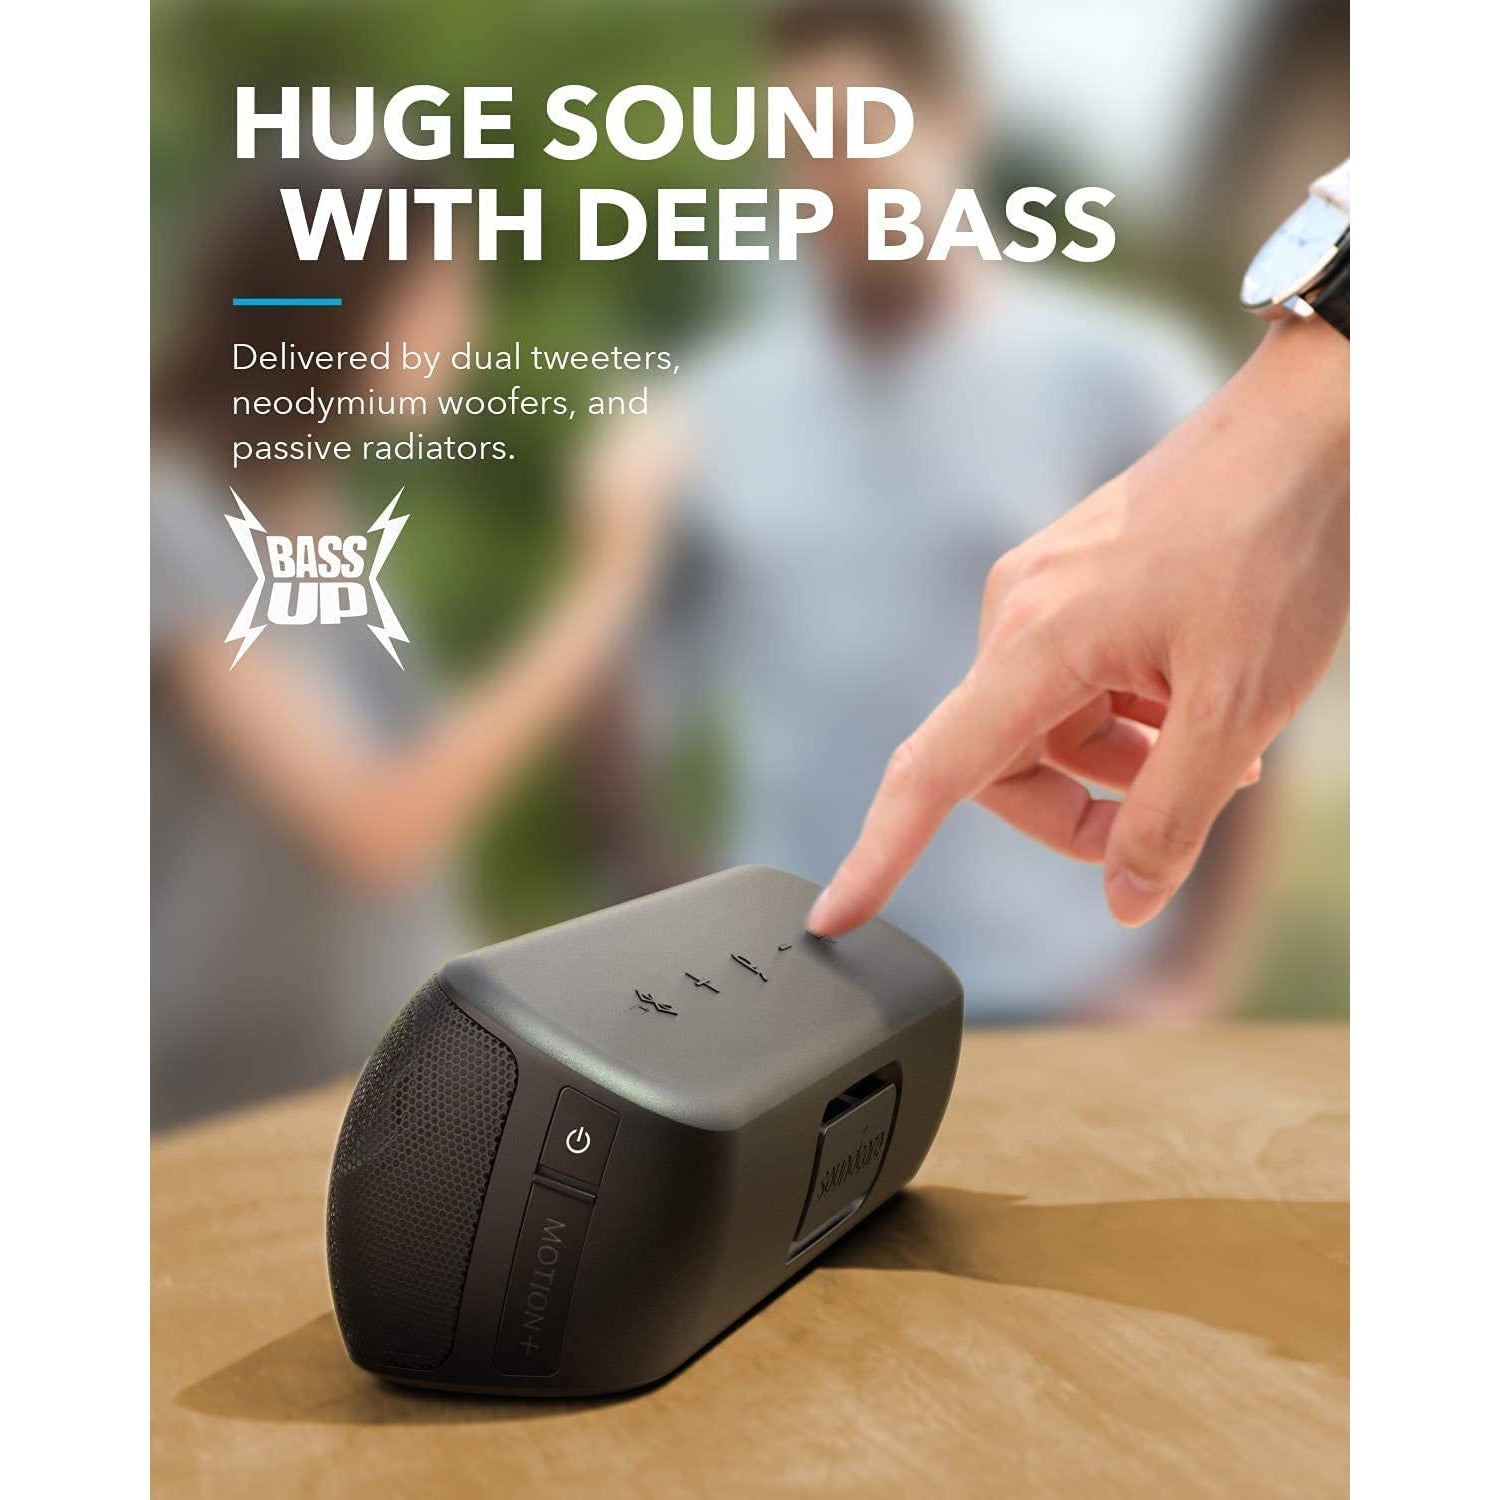 Soundcore Motion+ Bluetooth Speaker with Hi-Res 30W Audio, BassUp, Extended Bass and Treble